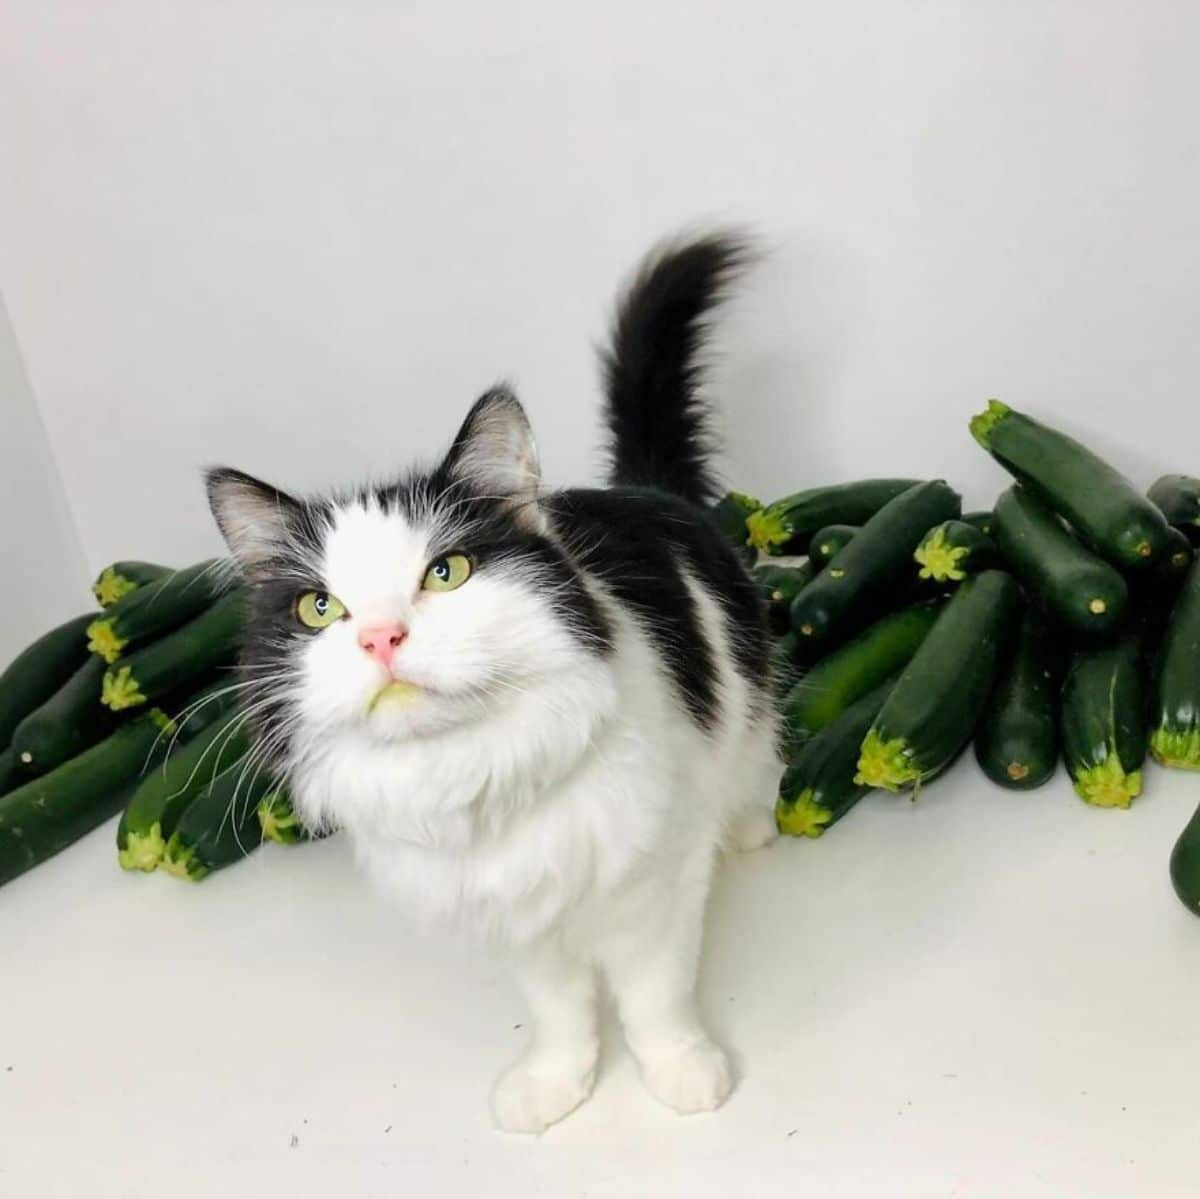 black and white fluffy cat sitting ona table facing away from a large pile of courgettes